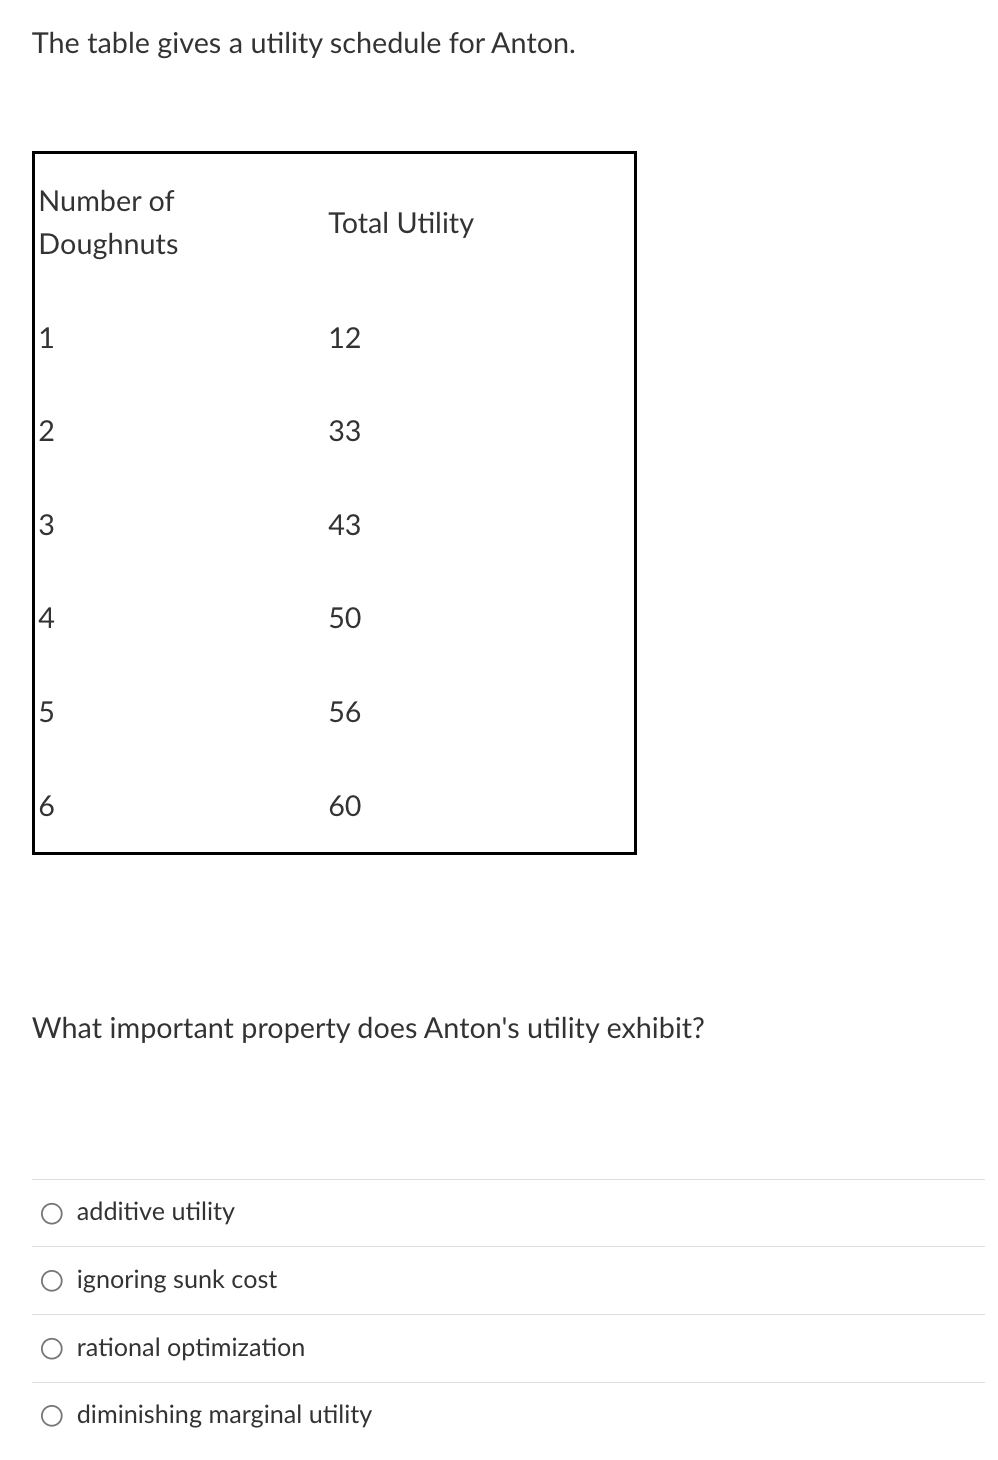 The table gives a utility schedule for Anton.
Number of
Doughnuts
1
3
4
6
Total Utility
12
33
43
50
56
60
What important property does Anton's utility exhibit?
additive utility
ignoring sunk cost
rational optimization
diminishing marginal utility